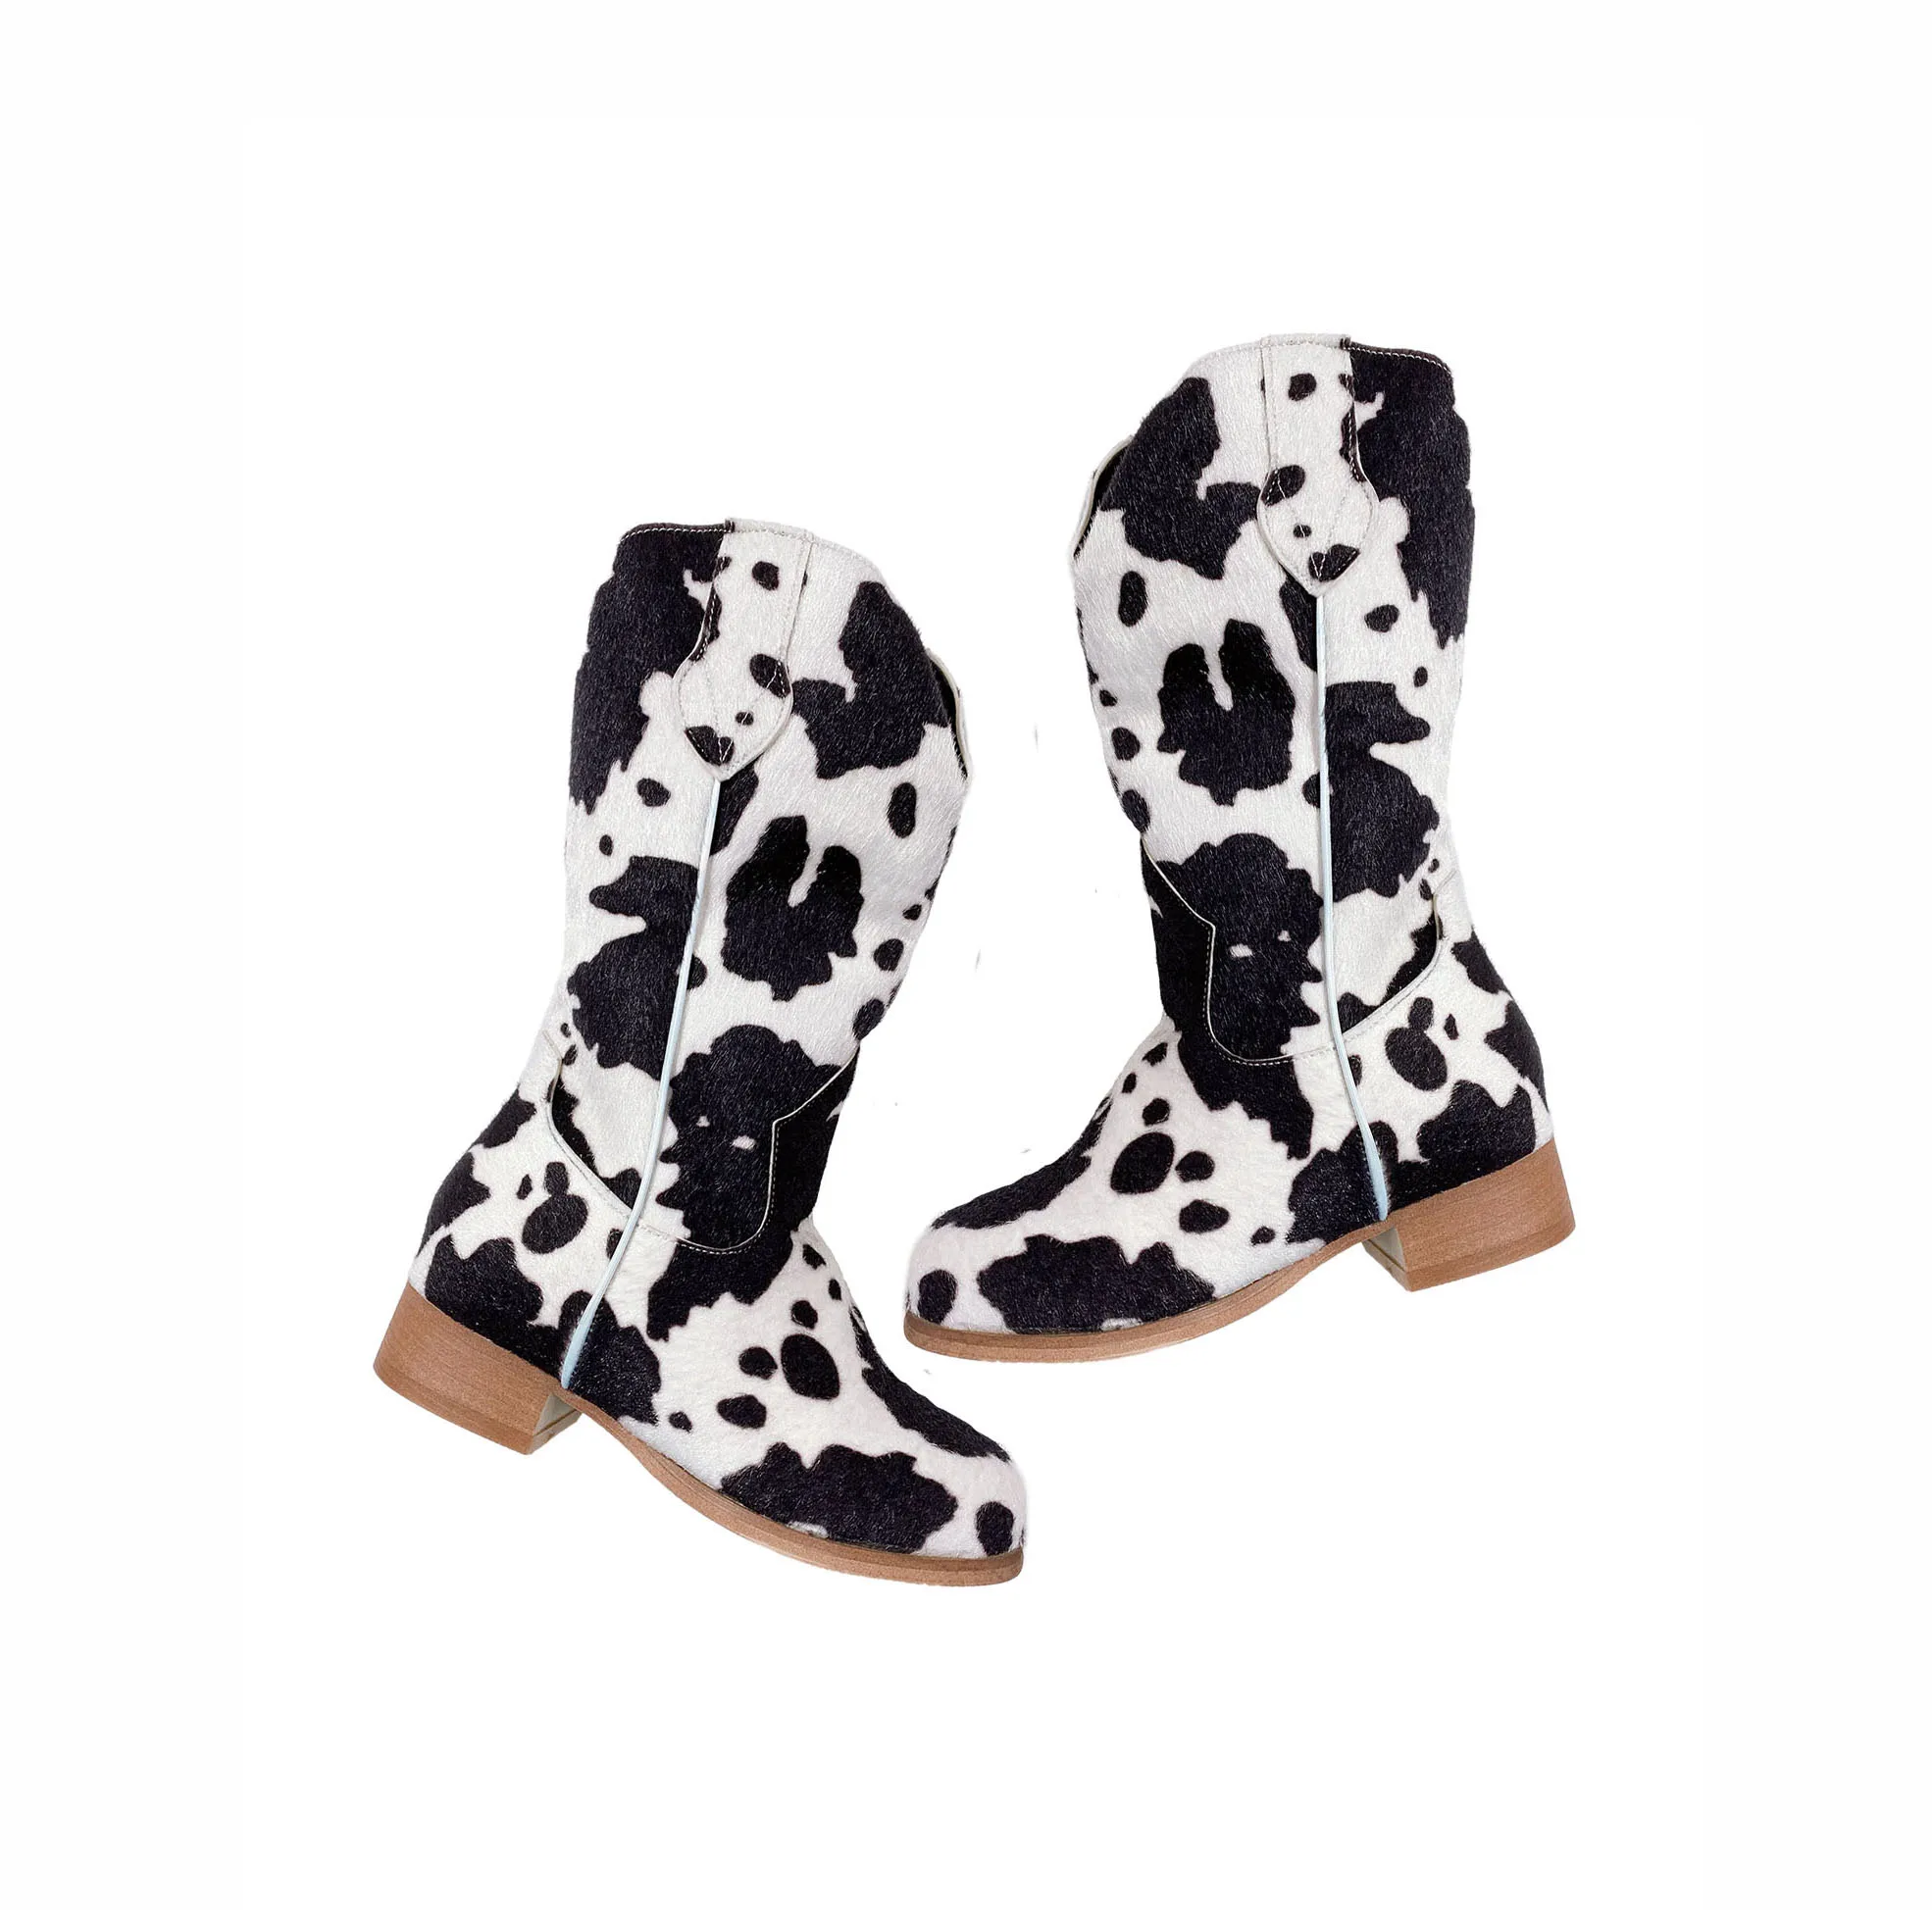 

Wholesale Fashion Boots for Girl Black and White Cow Print Boot Kids Western Style Cowboy Boots Toddler Baby Glitter Martens Boo, 5 colors as pics shows